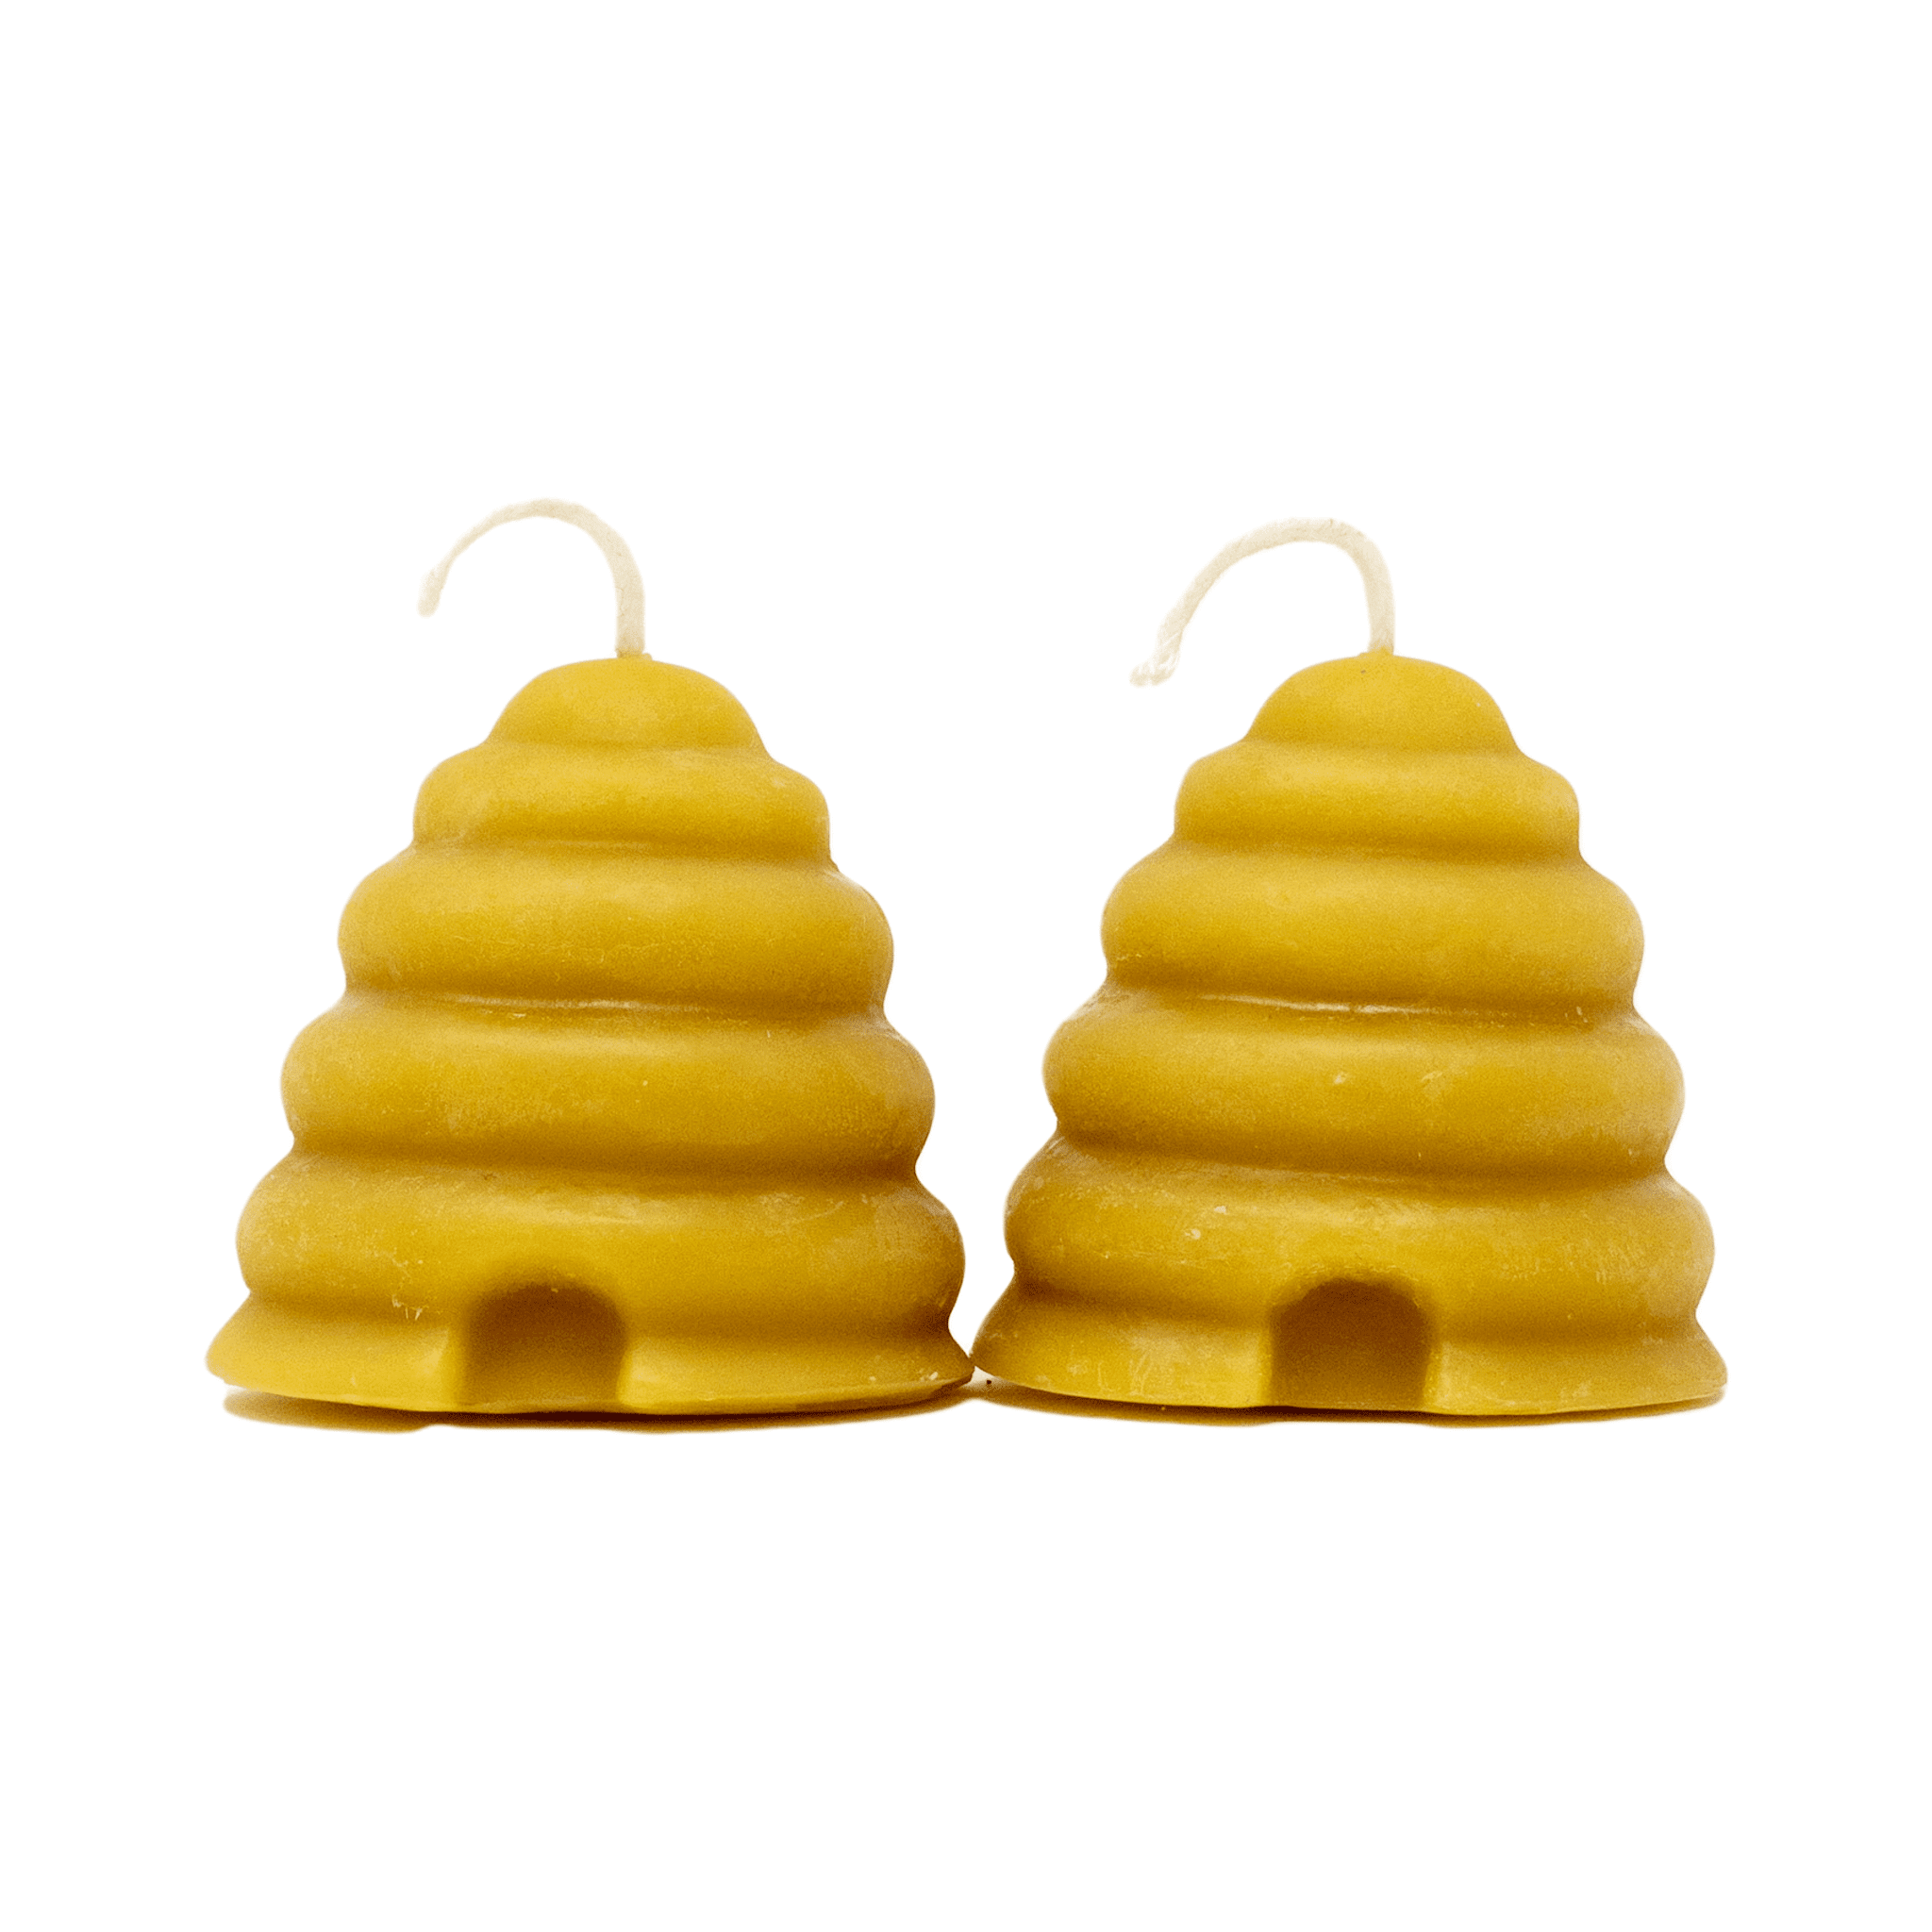 100% Pure Beeswax Mini Skep Votive Candles Set of 2 by Sister Bees